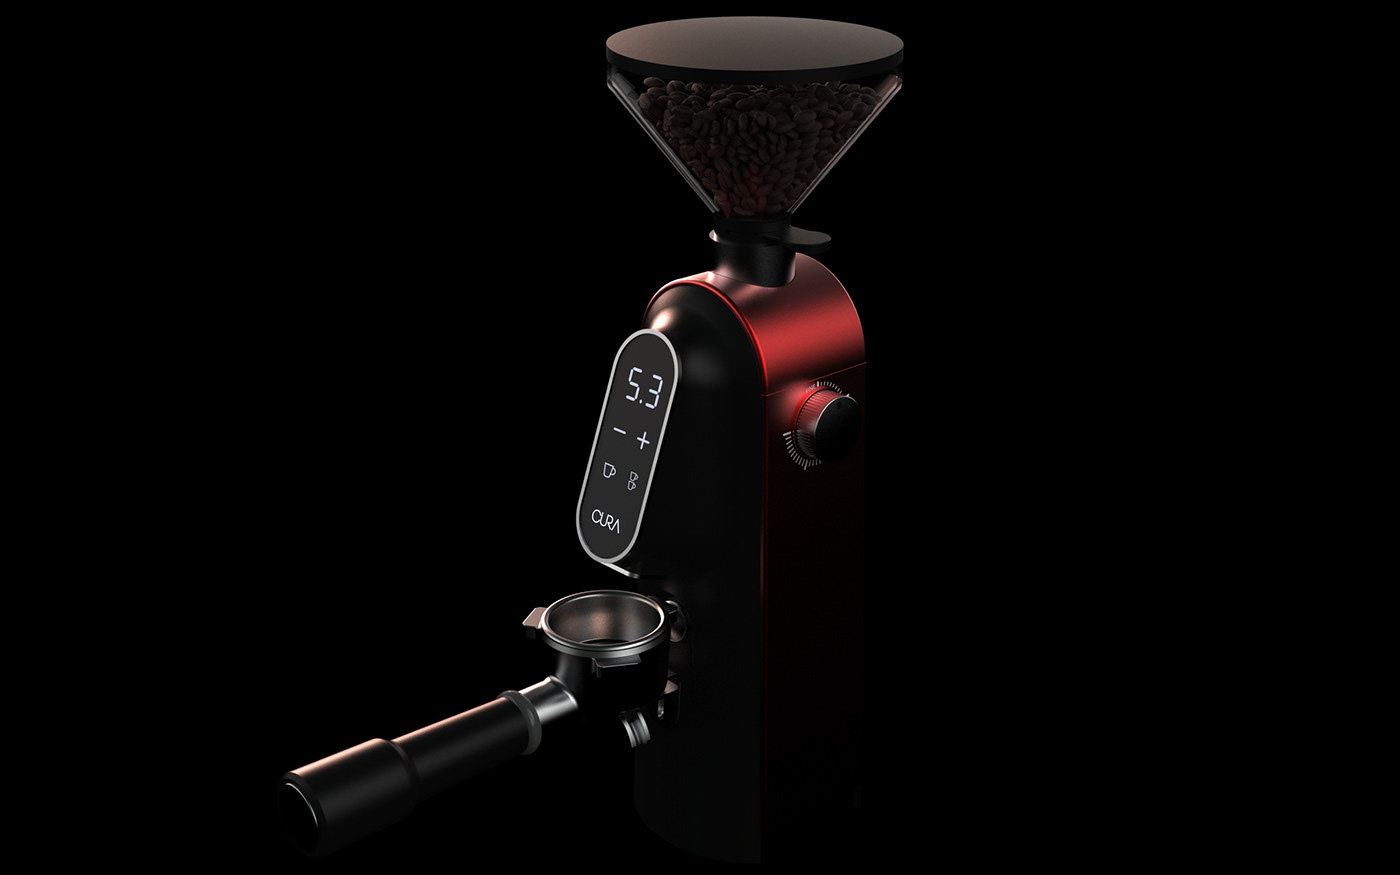 agency CGI Coffee coffee grinder concept design industrial design  Kitchen Appliance product design  visualization